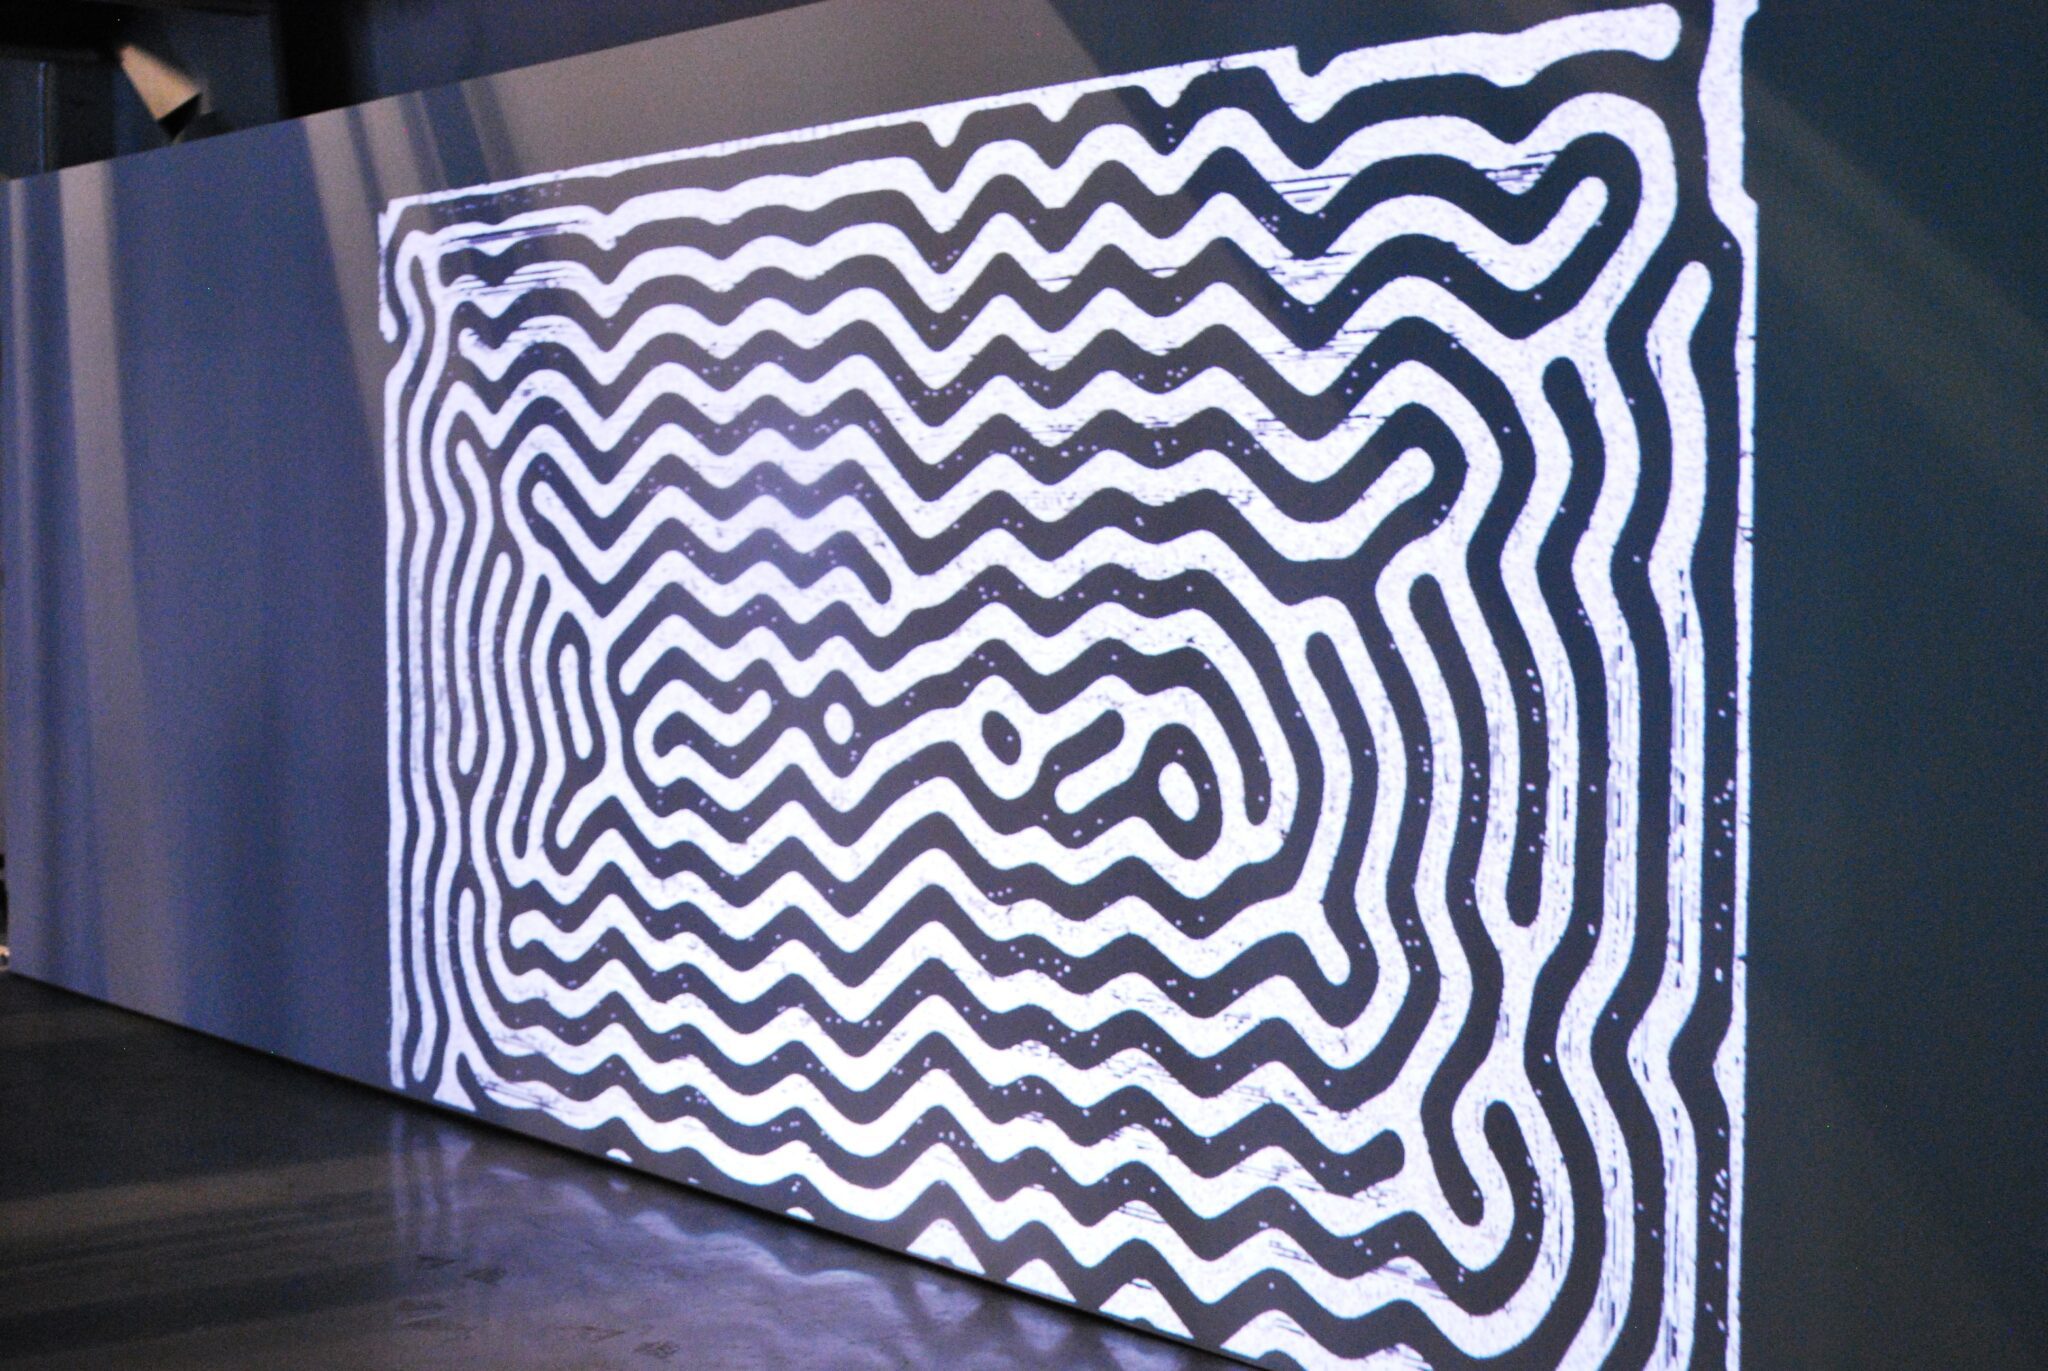 video projection of black and white zig zag lines